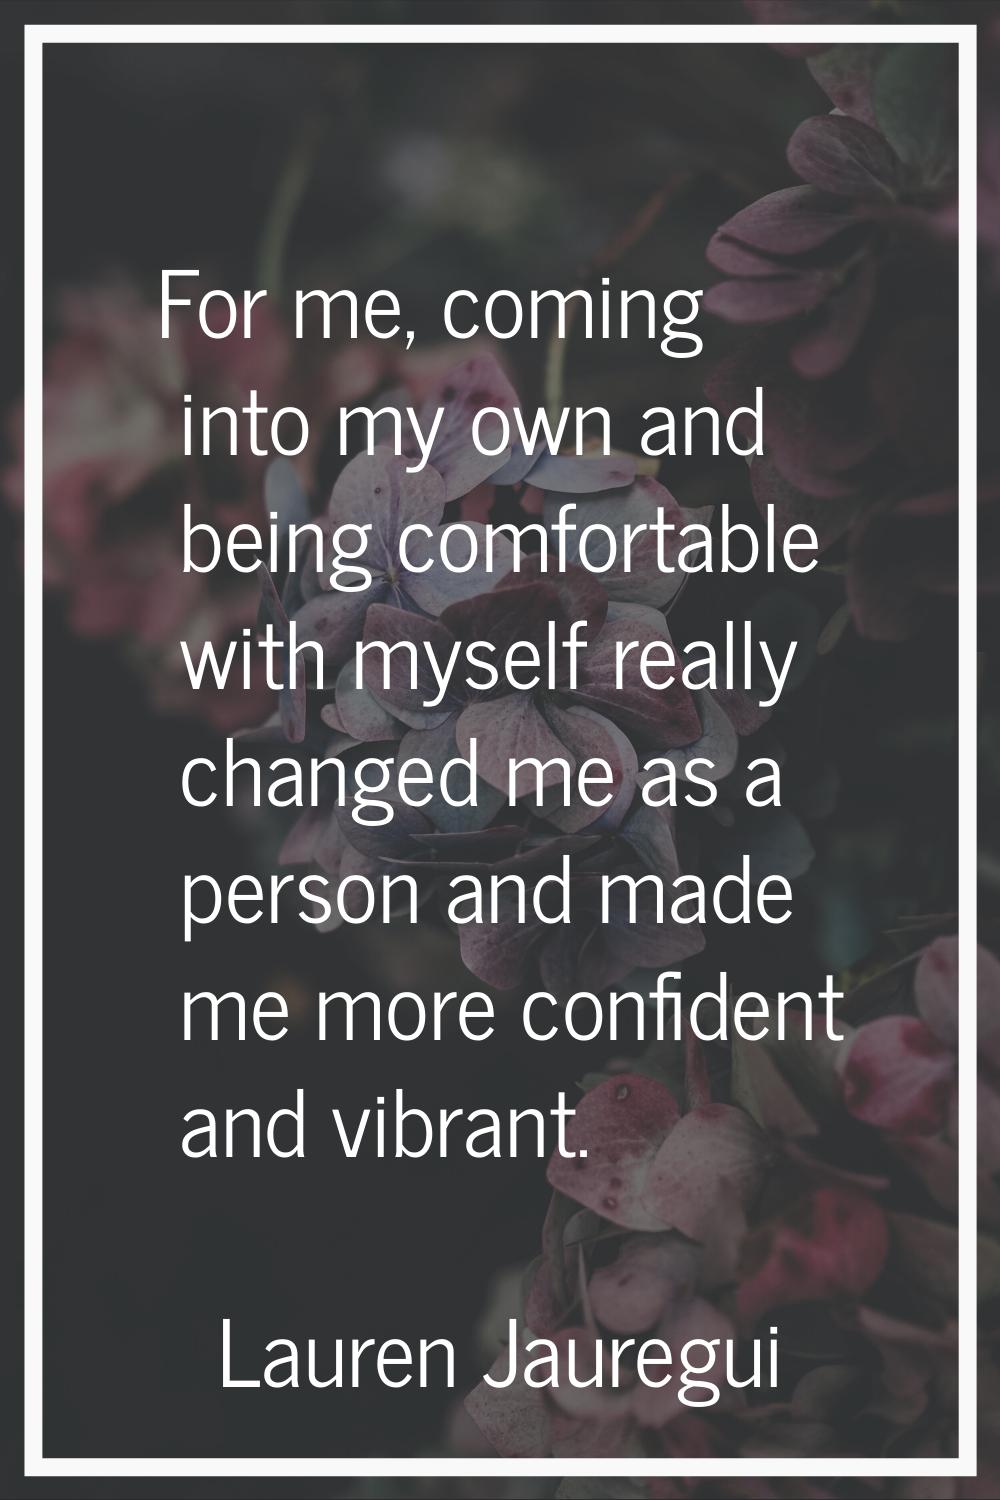 For me, coming into my own and being comfortable with myself really changed me as a person and made